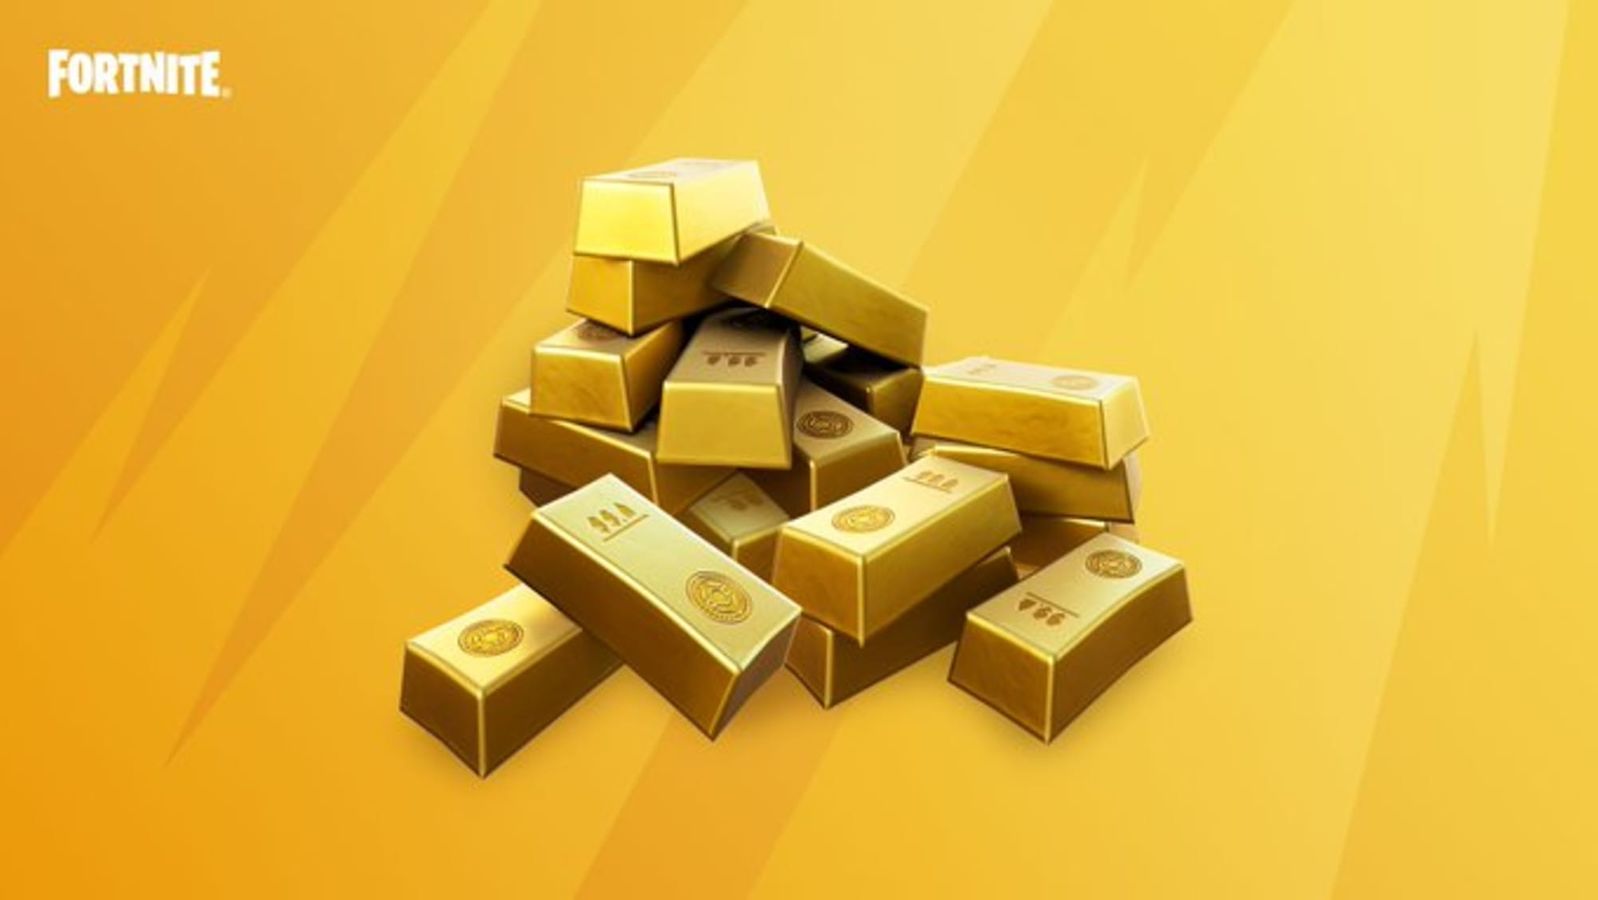 the official fortnite promo images showing gold bars